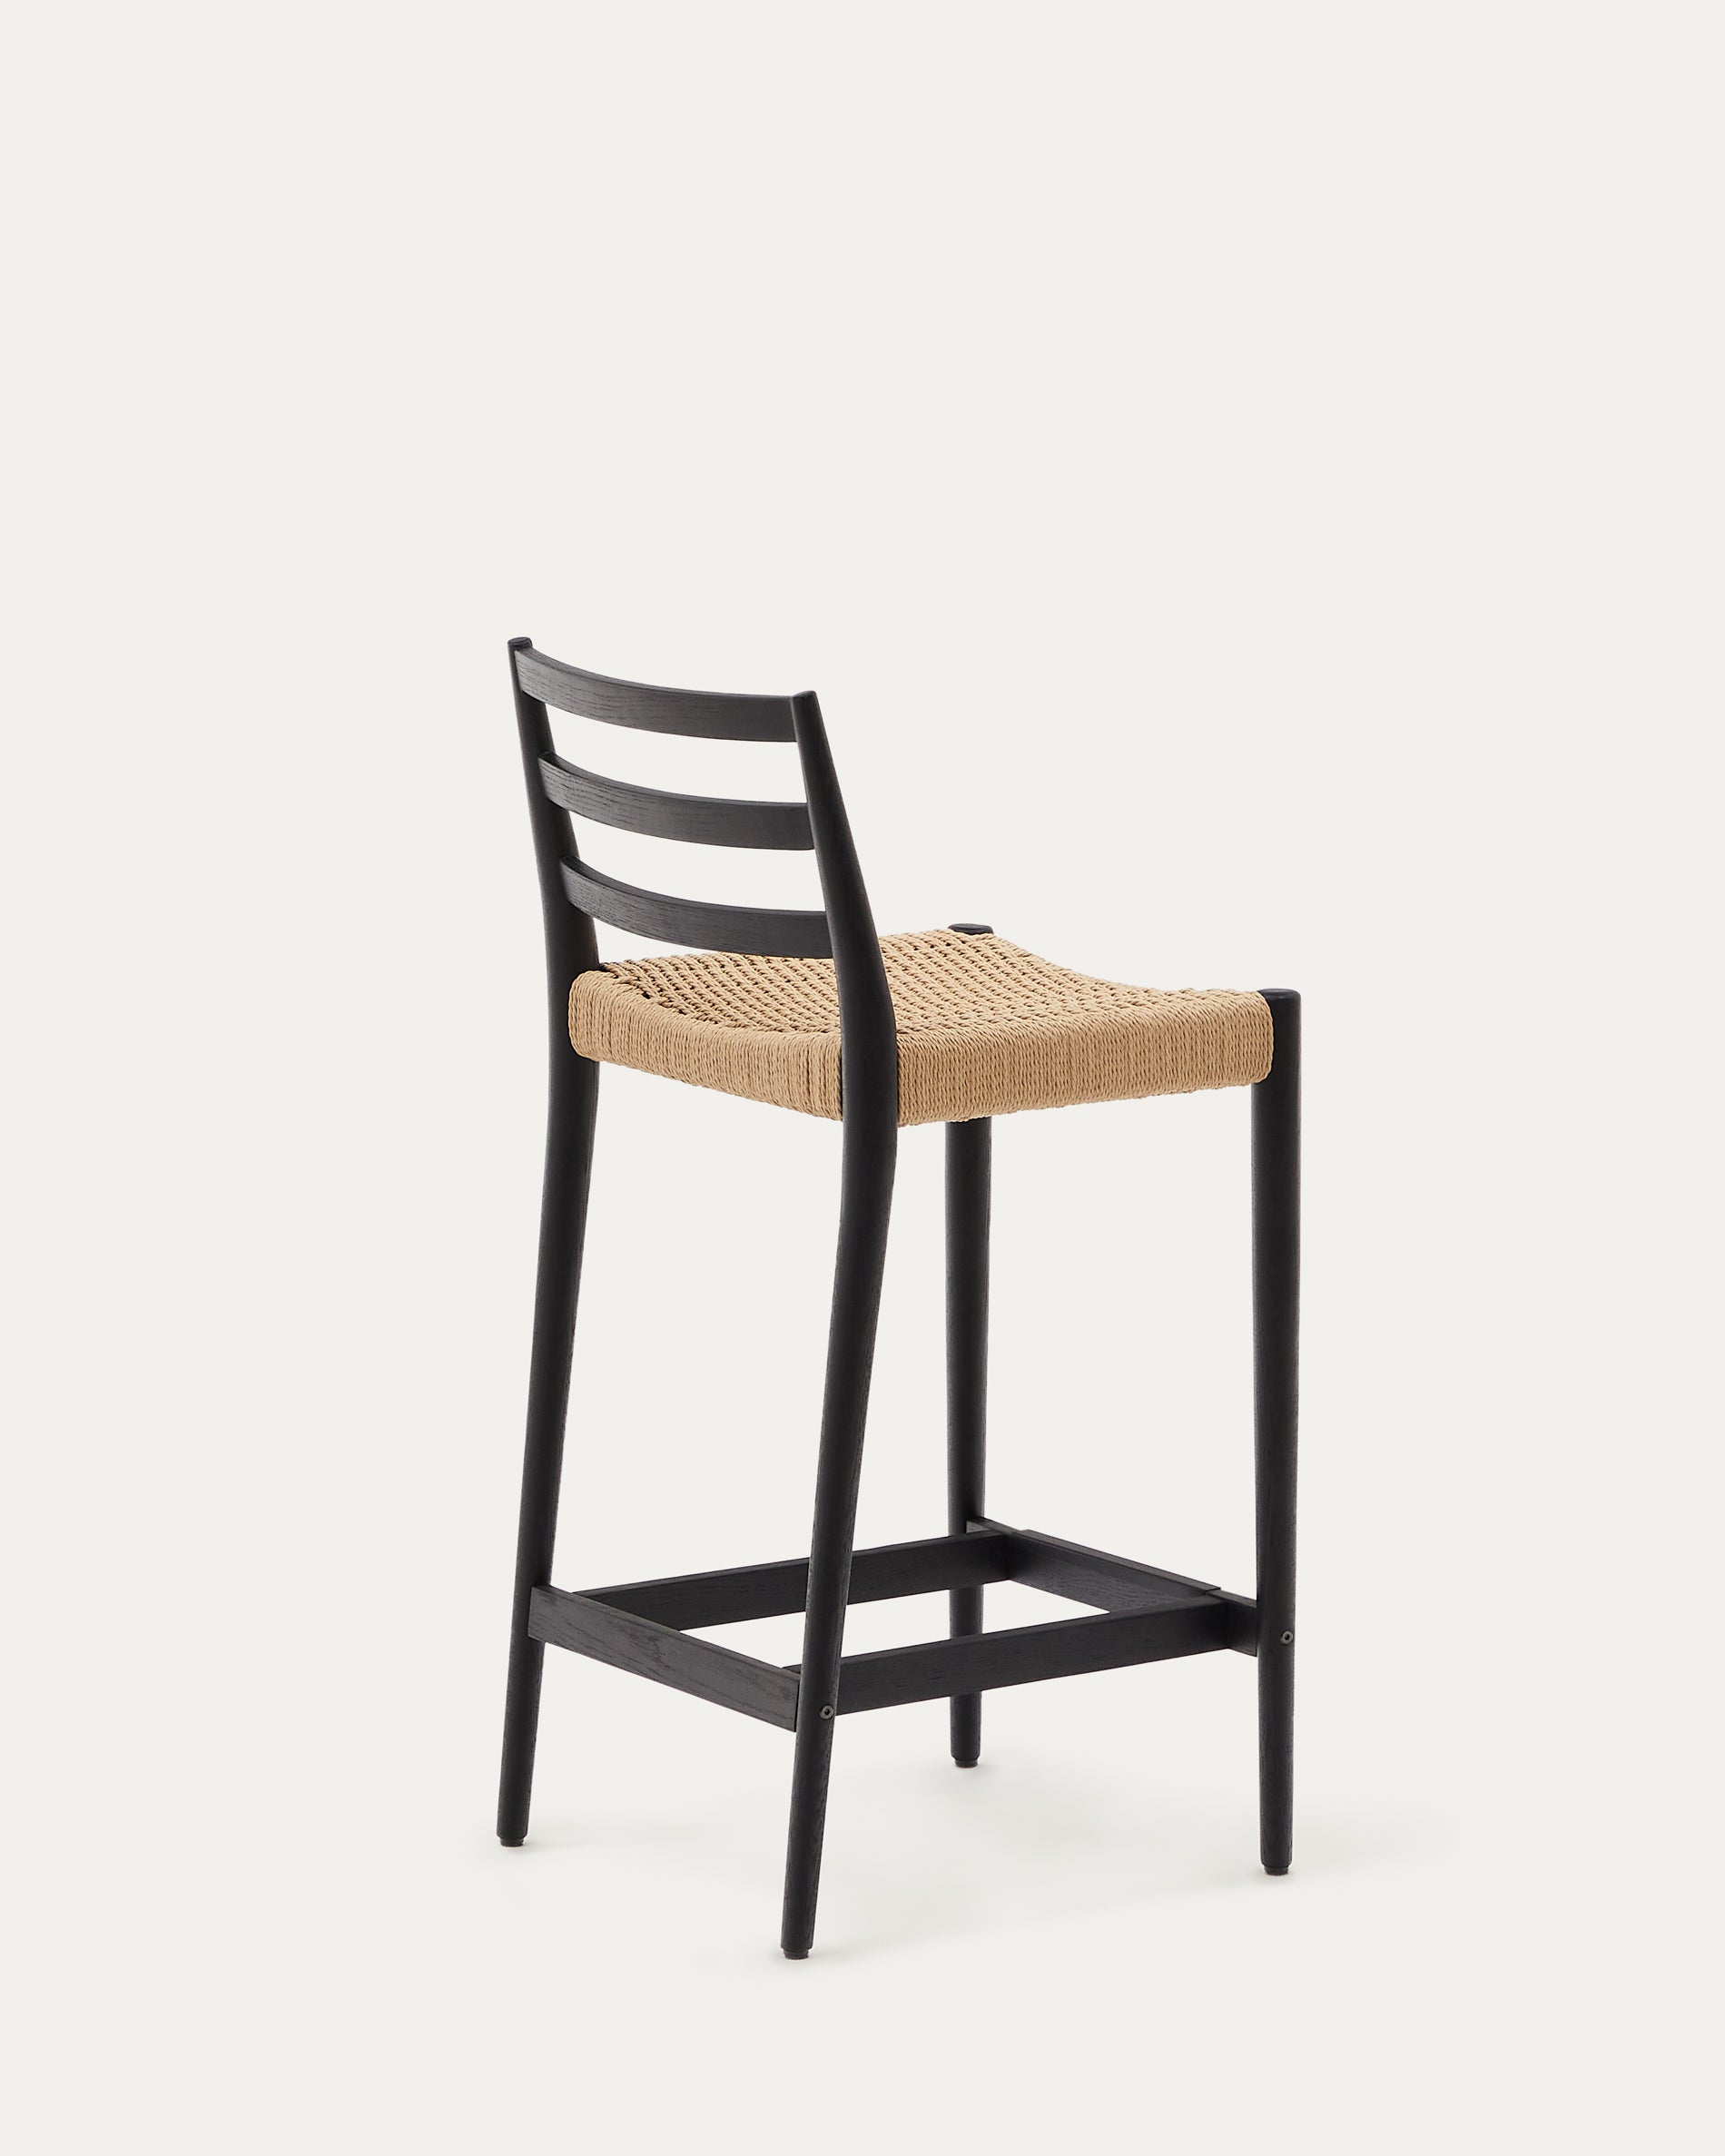 Analy chair with back, solid oak with black finish and rope seat, 70 cm, 100% FSC